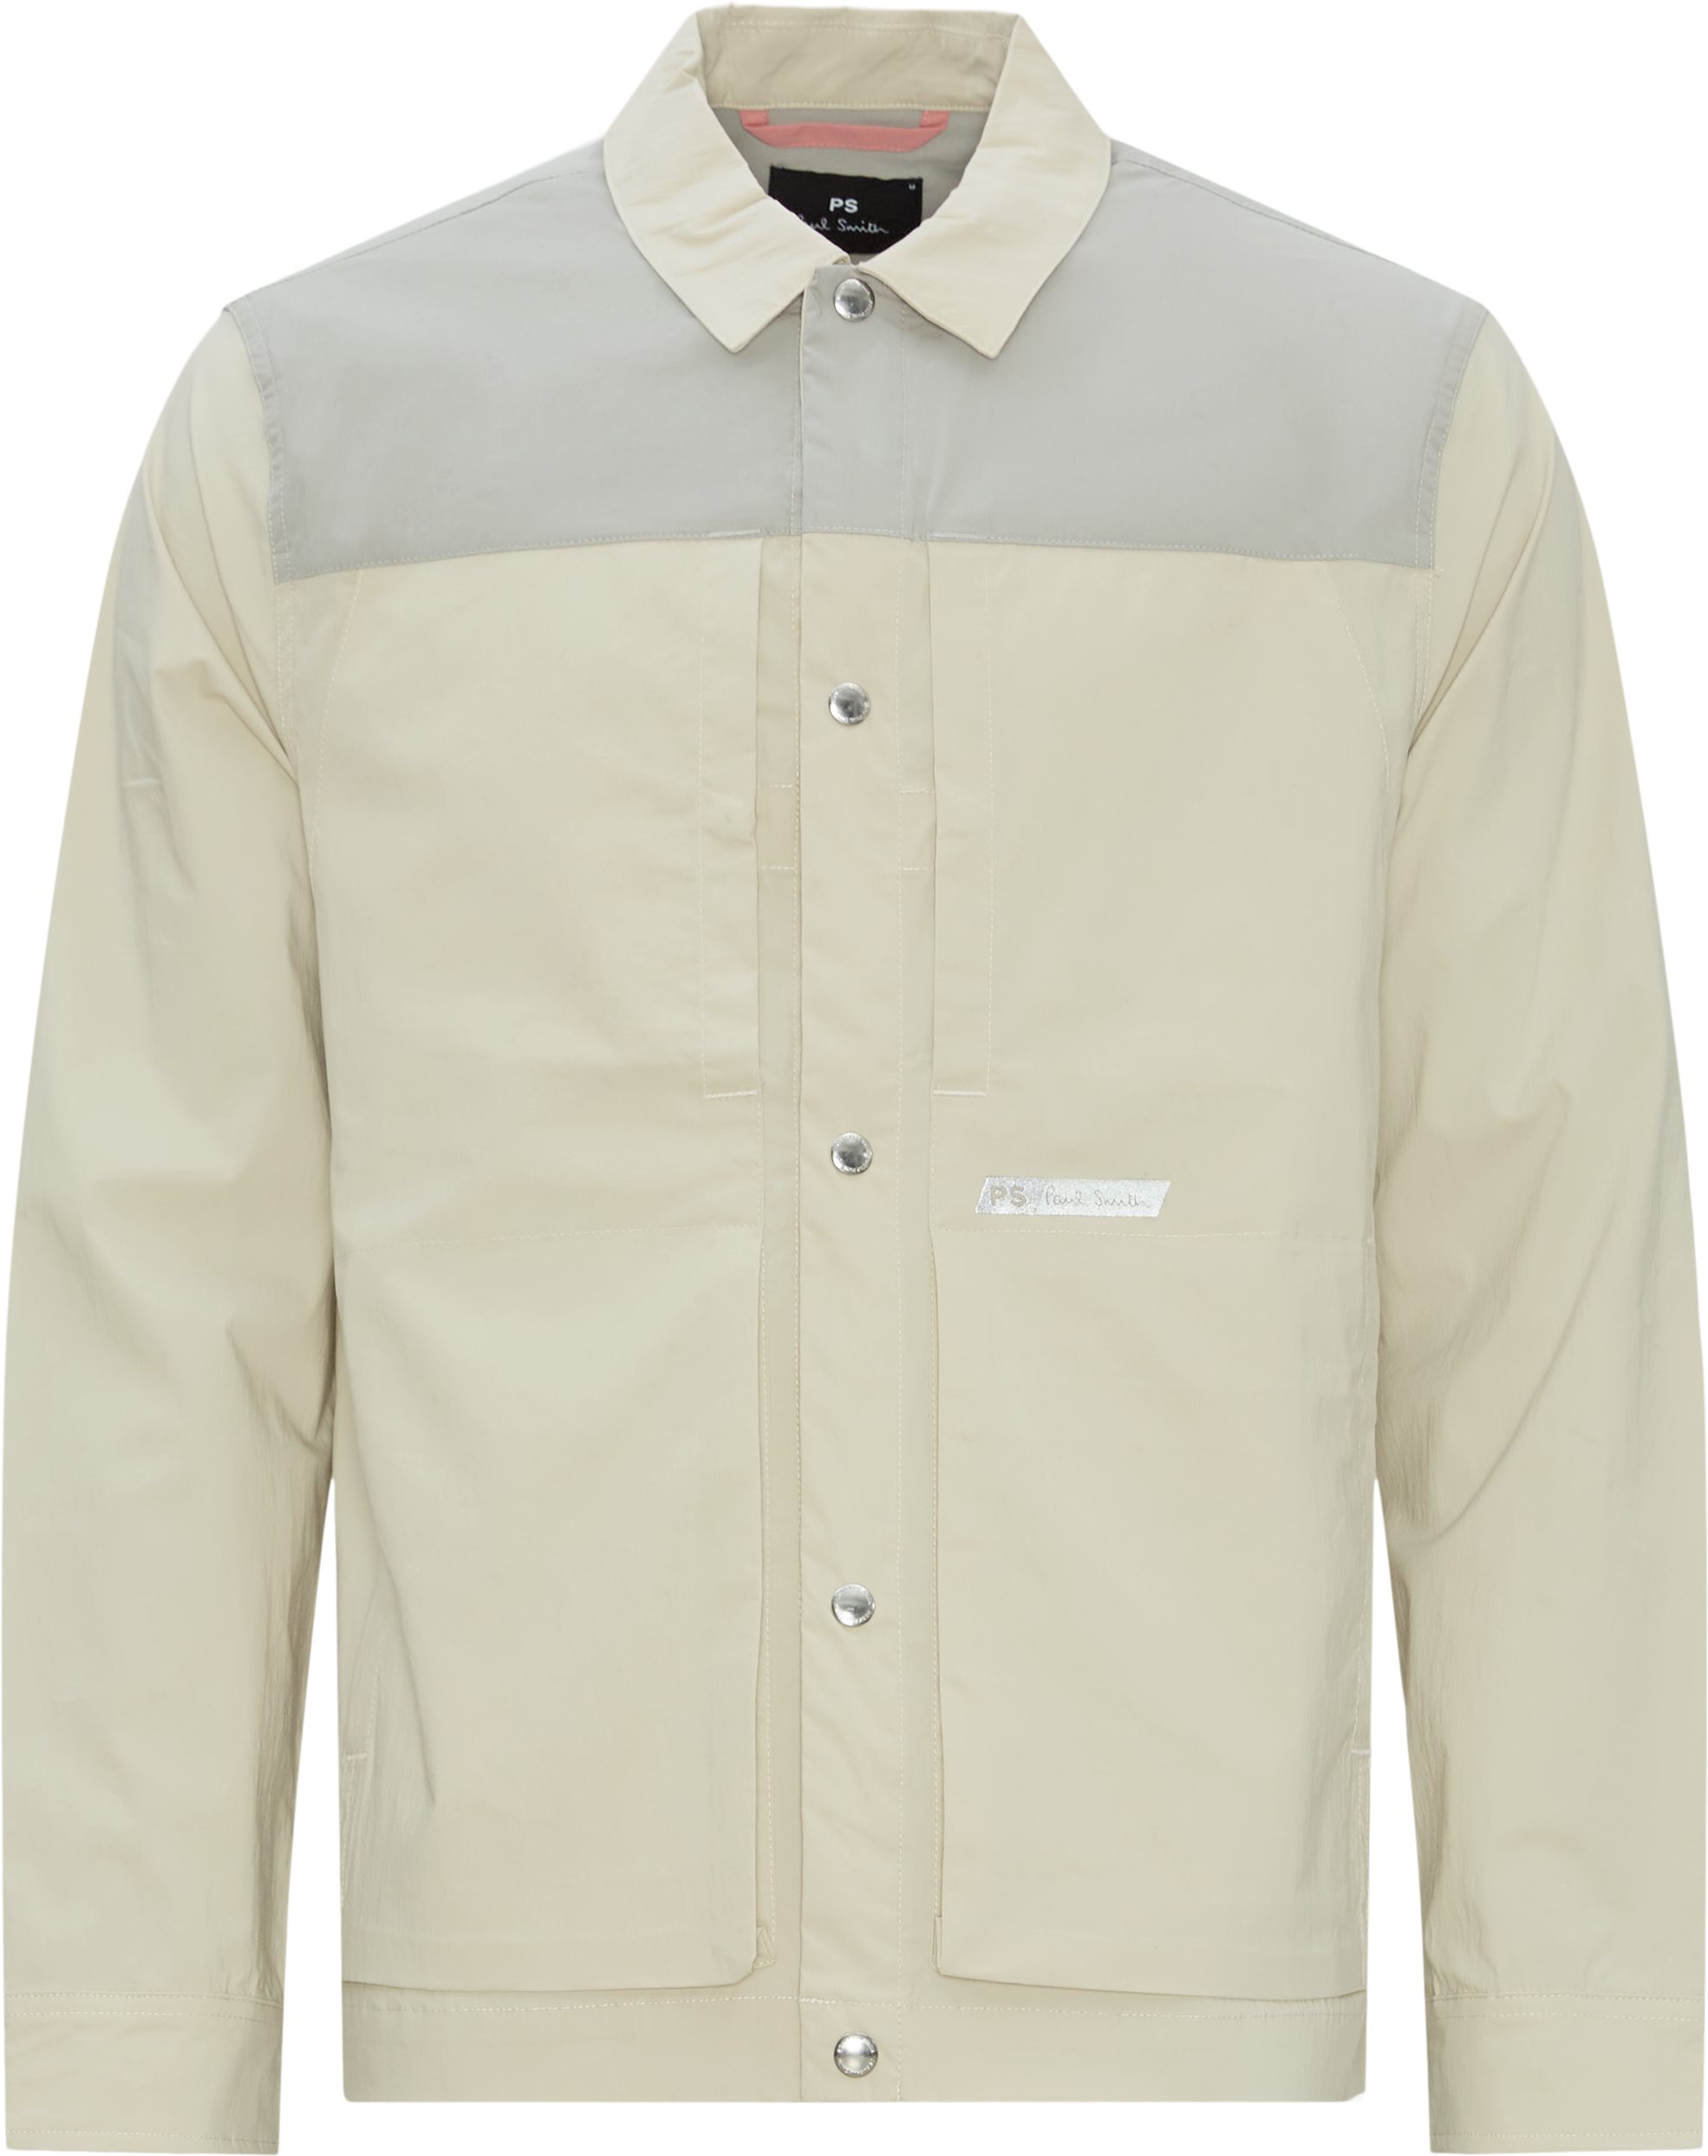 PS Paul Smith Jackets 692Y M21957 White